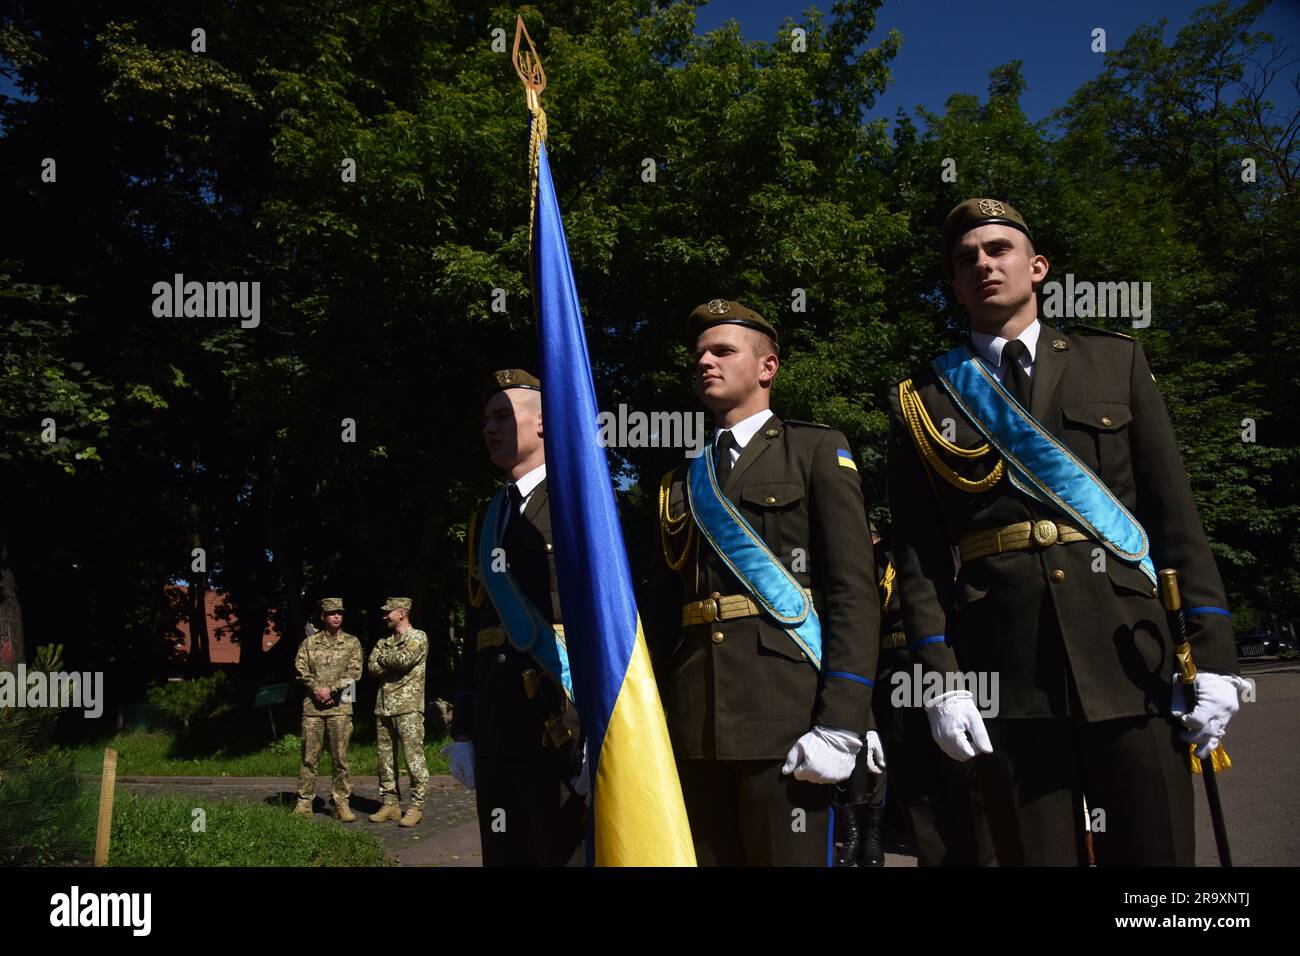 Lviv, Ukraine. 28th June, 2023. Cadets from the honor guard during the celebration of the Constitution Day of Ukraine. Ukraine celebrated the 27th anniversary of the adoption of the country's basic law - the constitution. In the conditions of the Russian-Ukrainian war, official events were very short. In Lviv, the Ukrainian flag was raised, honor guard marched, and a military band performed. Credit: SOPA Images Limited/Alamy Live News Stock Photo